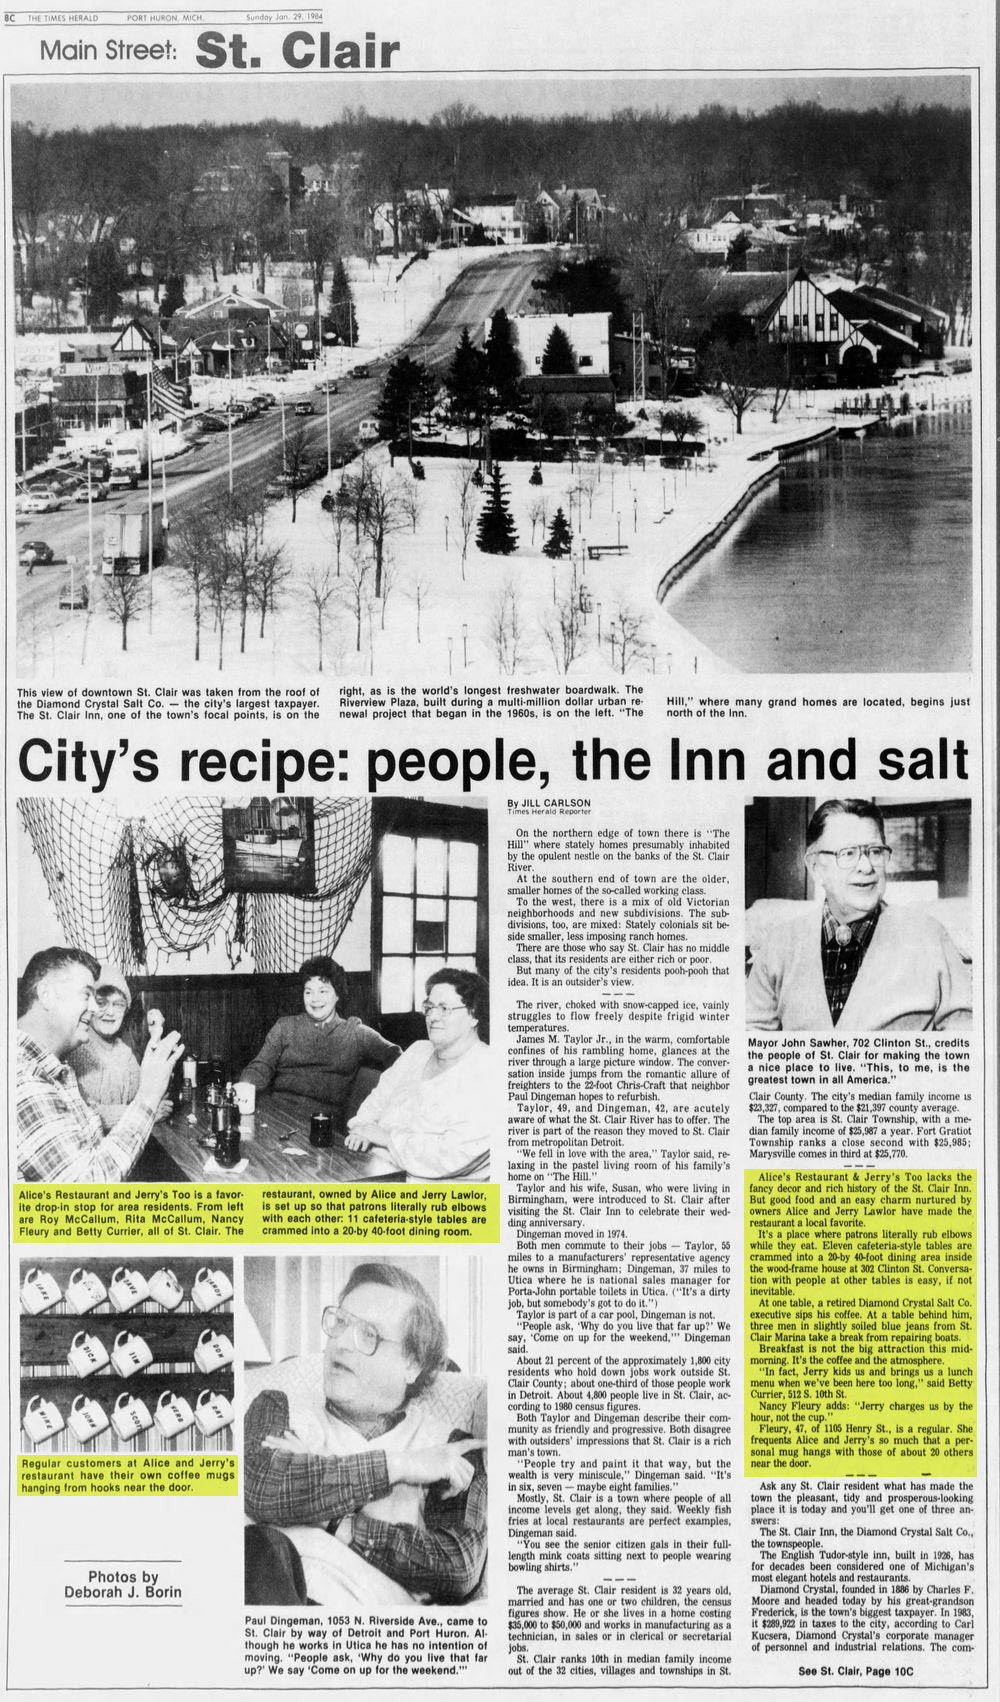 Alices Restaurant - Jan 29 1984 Article (newer photo)